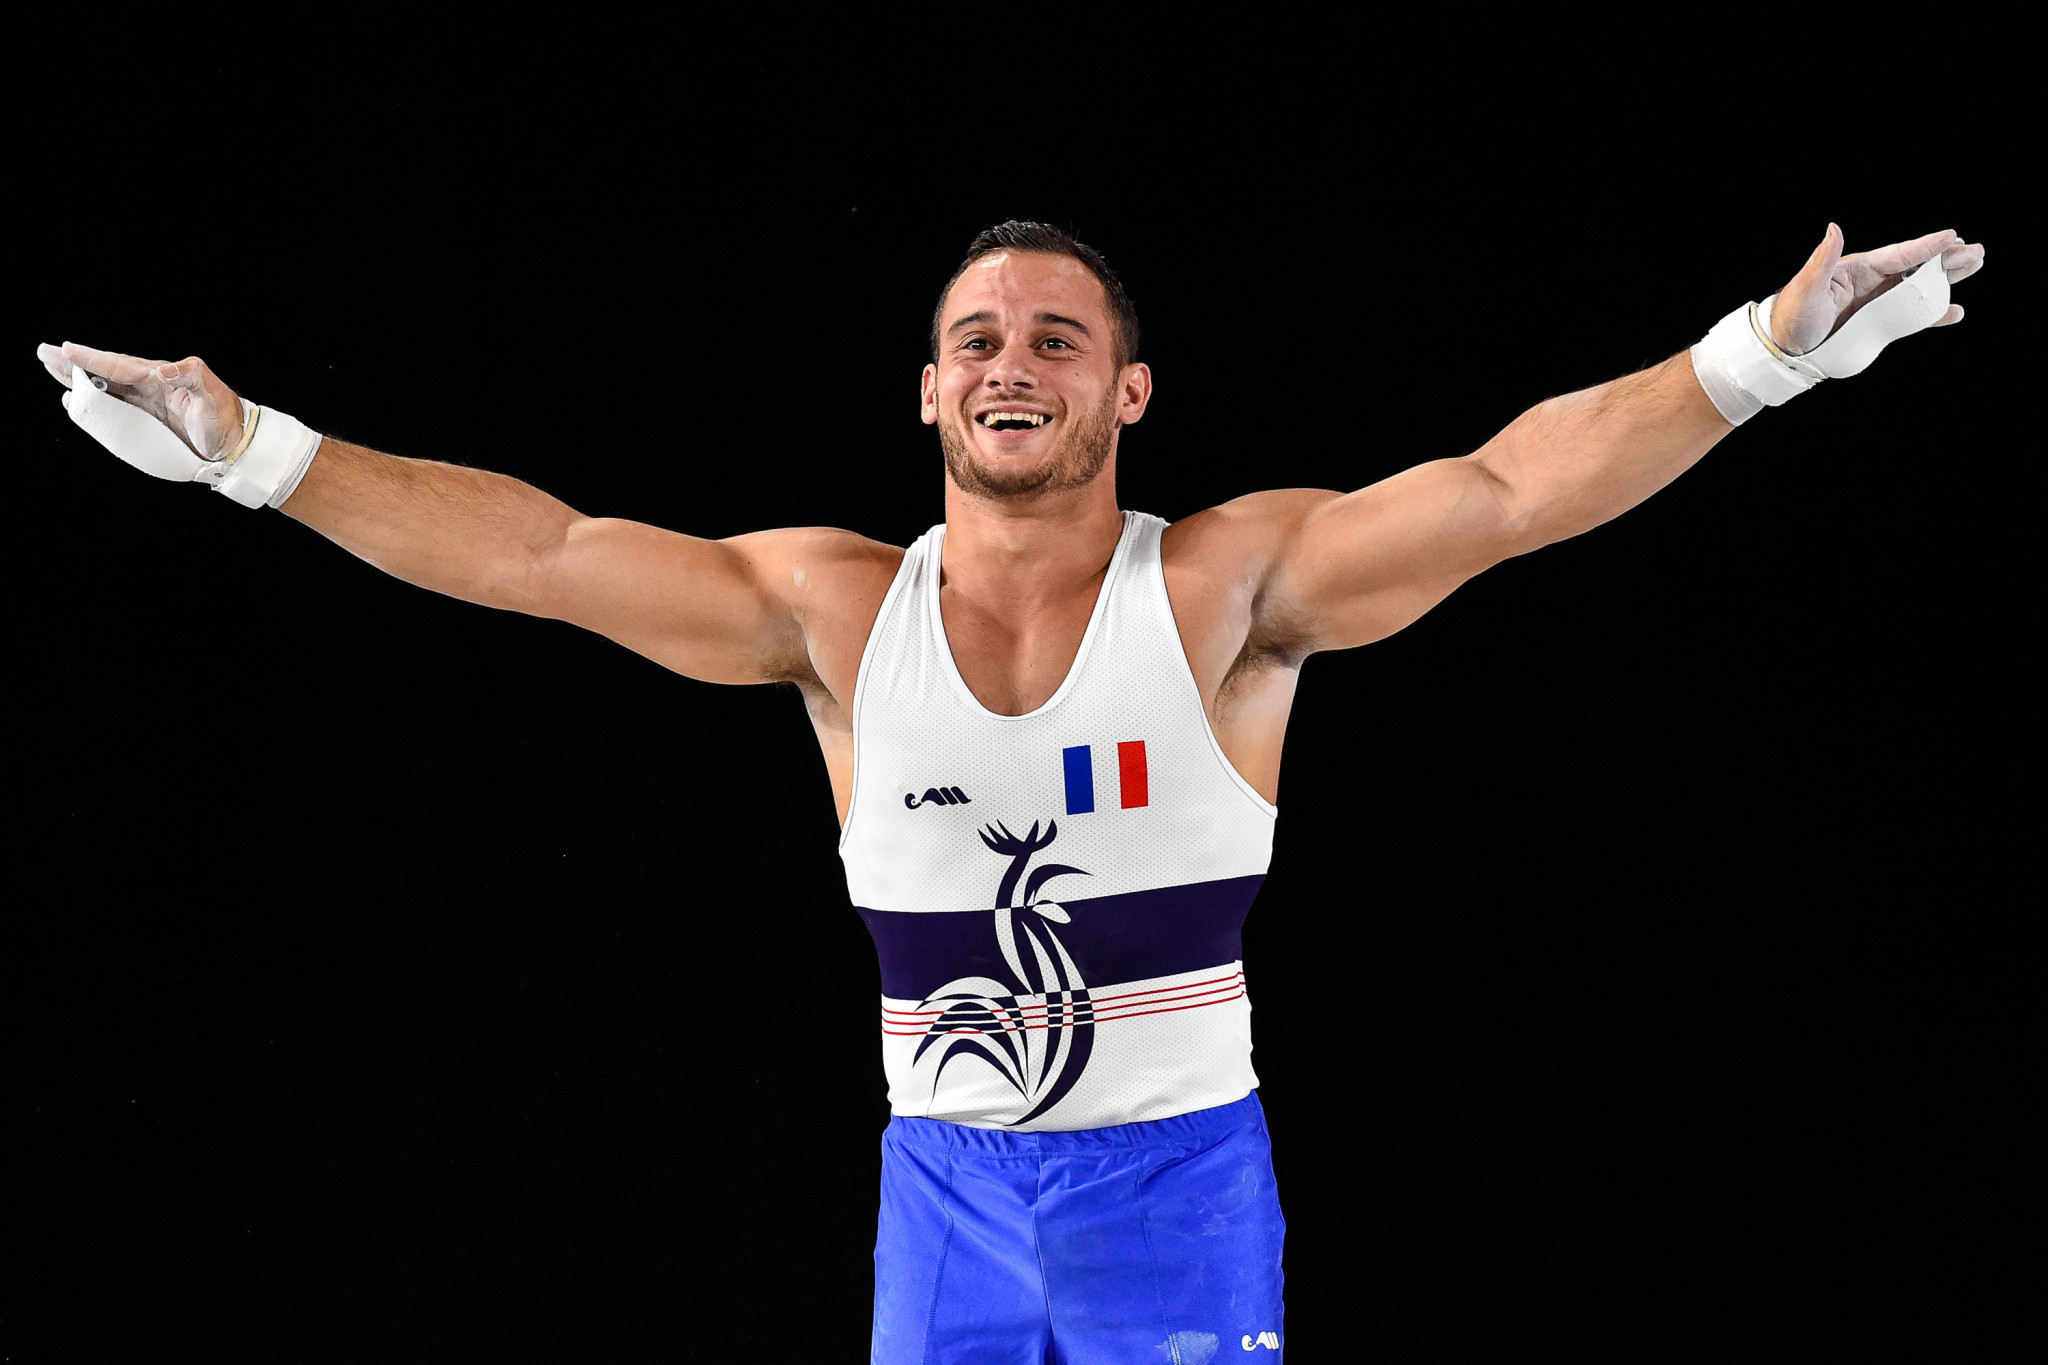 French gymnast Samir Aït Saïd has boldly declared he will end his Olympic Games demons by winning a gold medal at Tokyo 2020 ©Getty Images